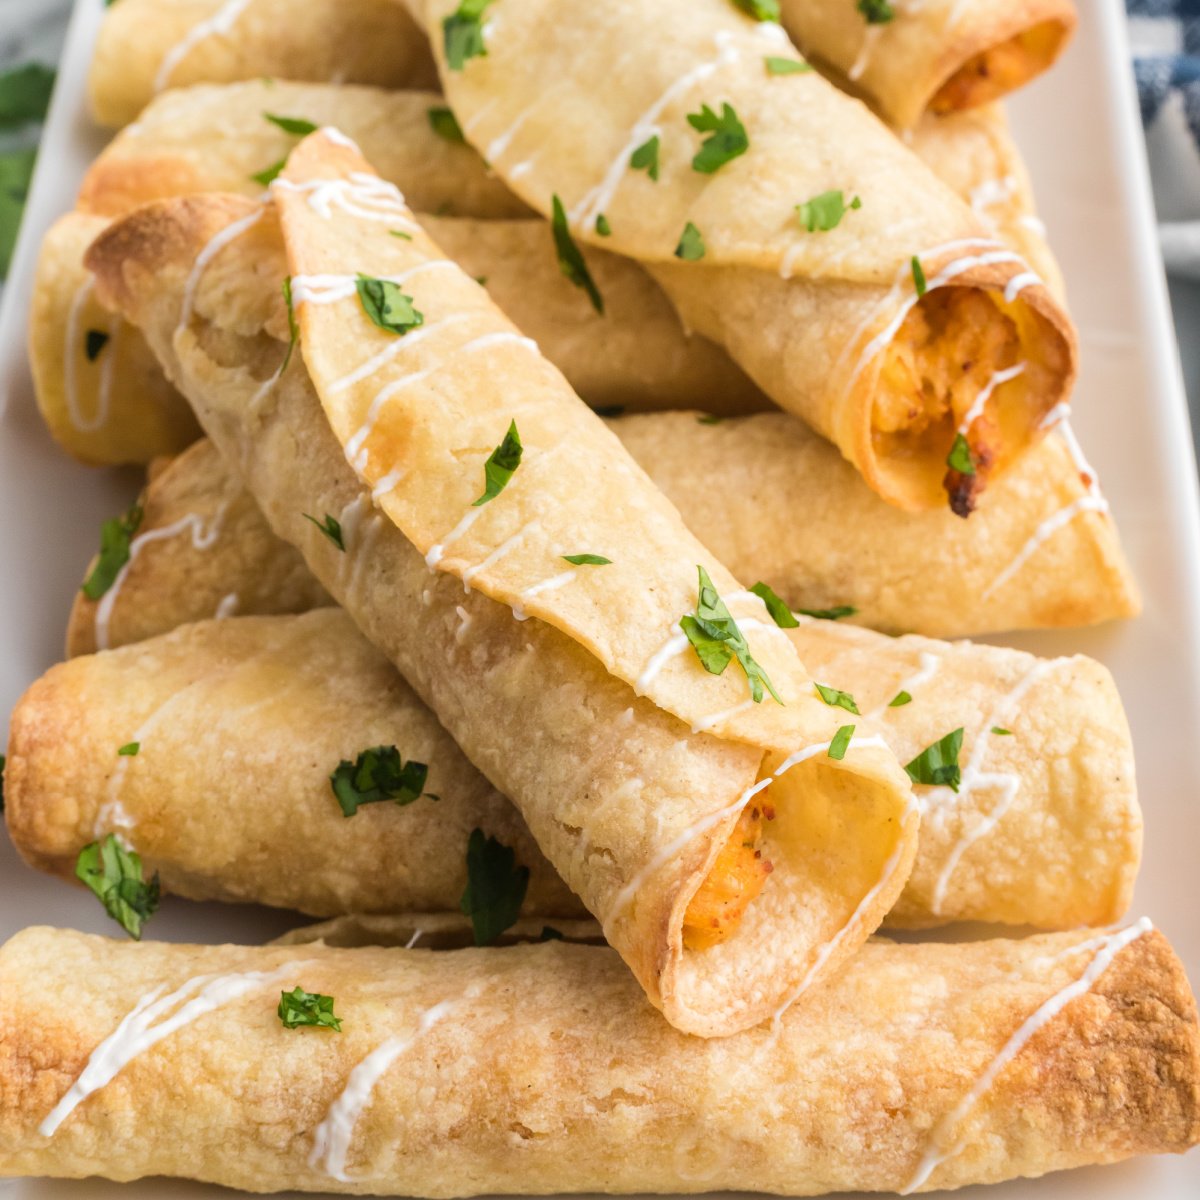 Chicken taquitos made in the air fryer and topped with sour cream and cilantro before serving.